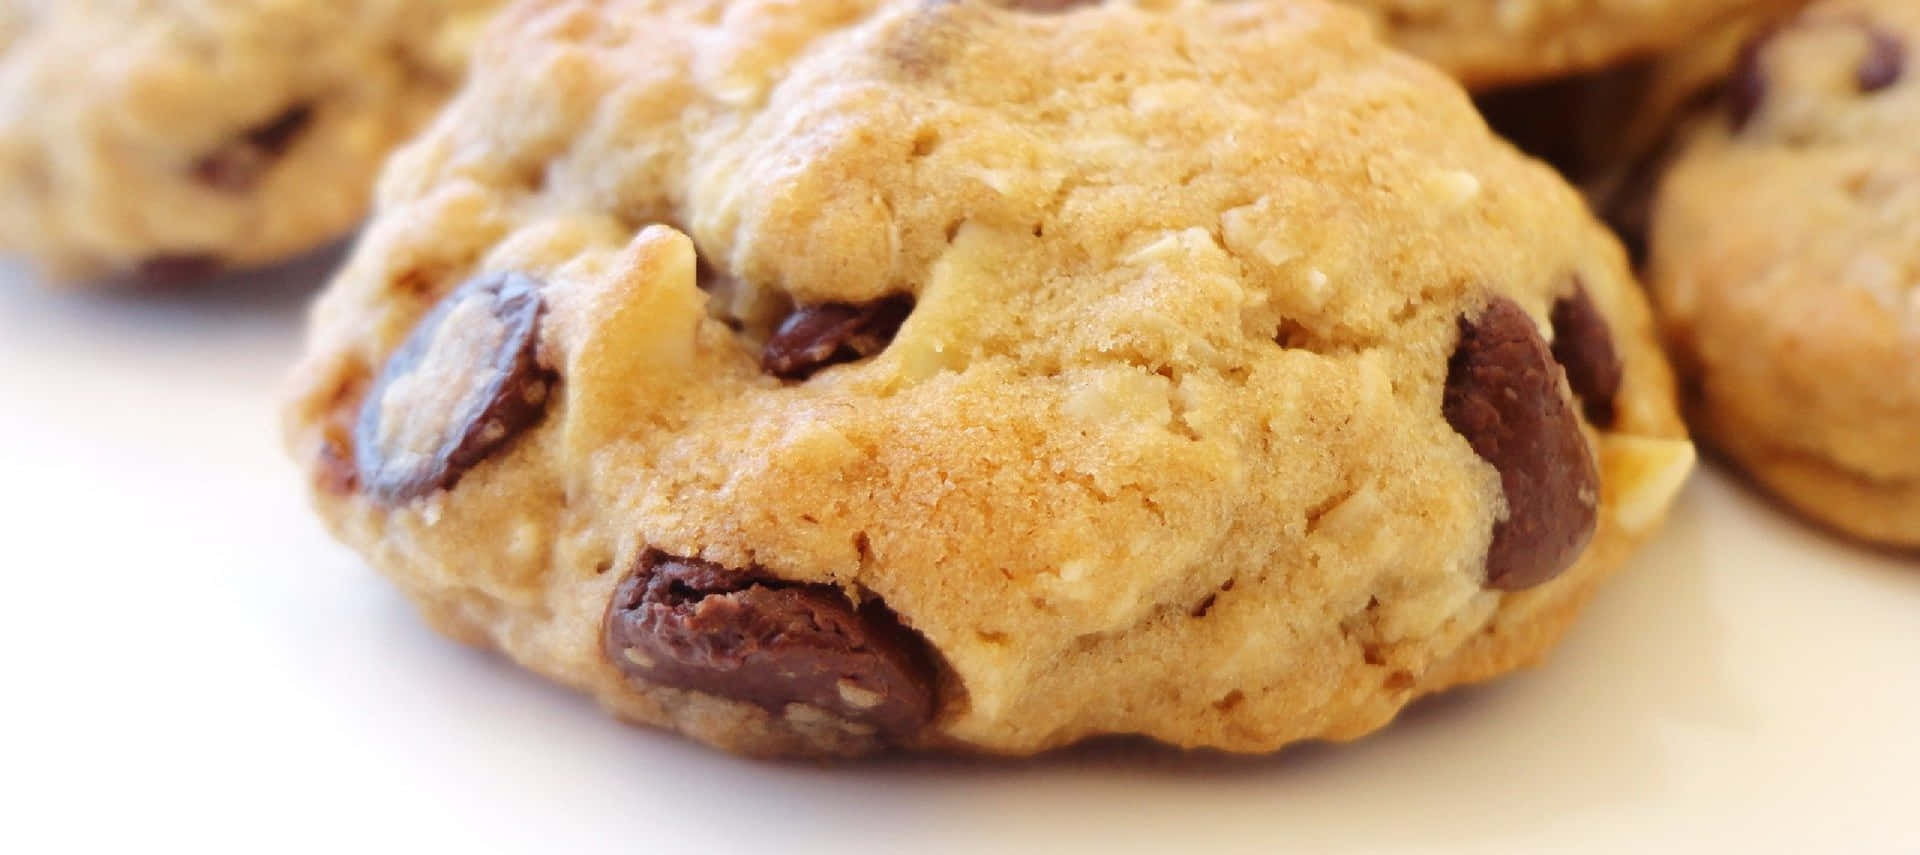 A Close Up Of Chocolate Chip Cookies